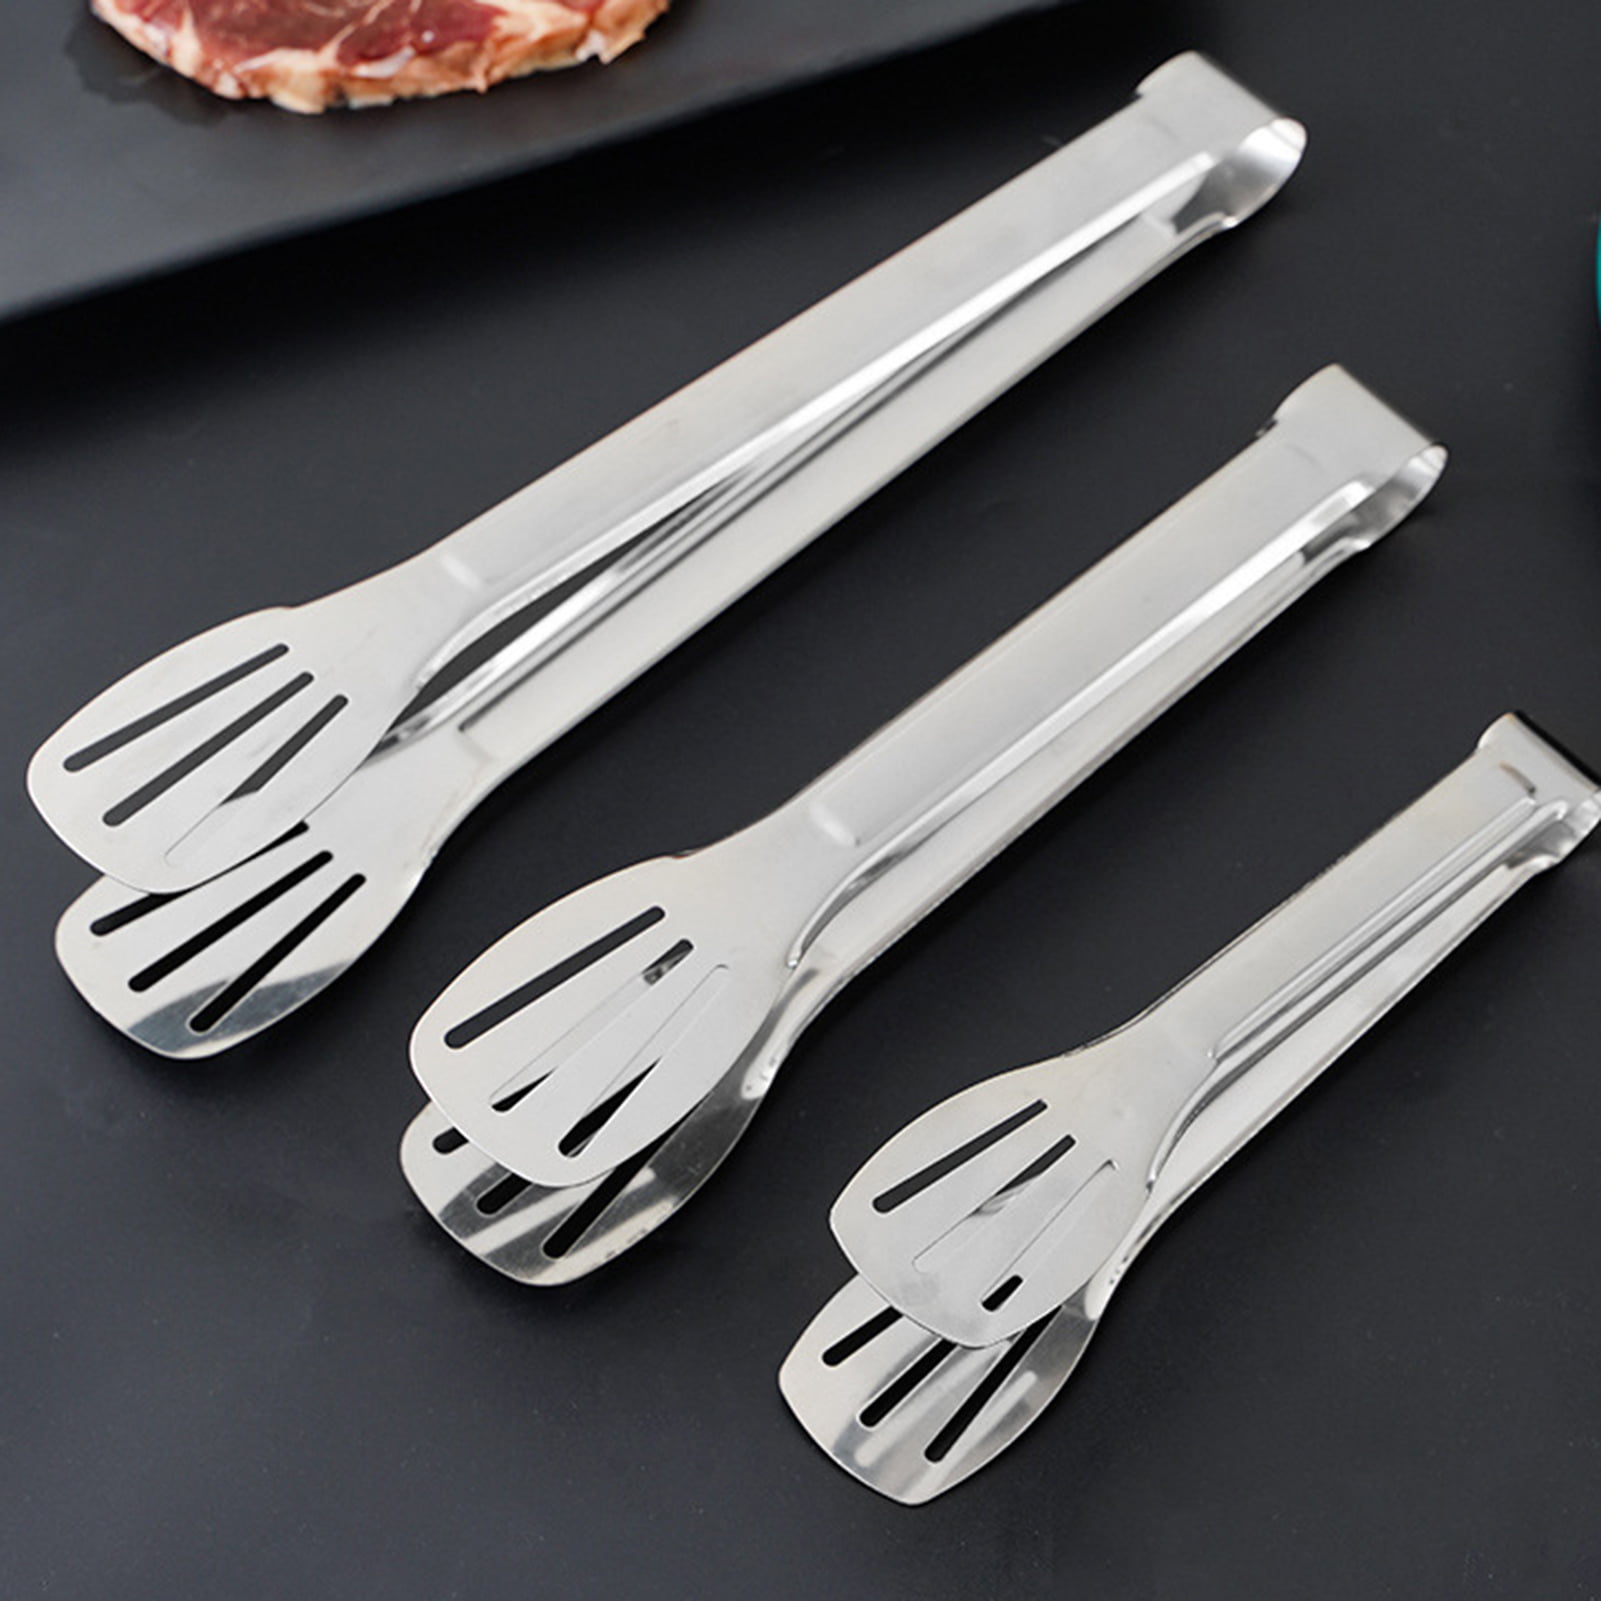 Denvdency 4pcs Stainless Steel Kitchen Tongs, Serving Tongs for Cooking, 10 inch Metal Food Tongs with Non-Slip Comfort Grip, Non-Stick Cooking Tongs High Heat